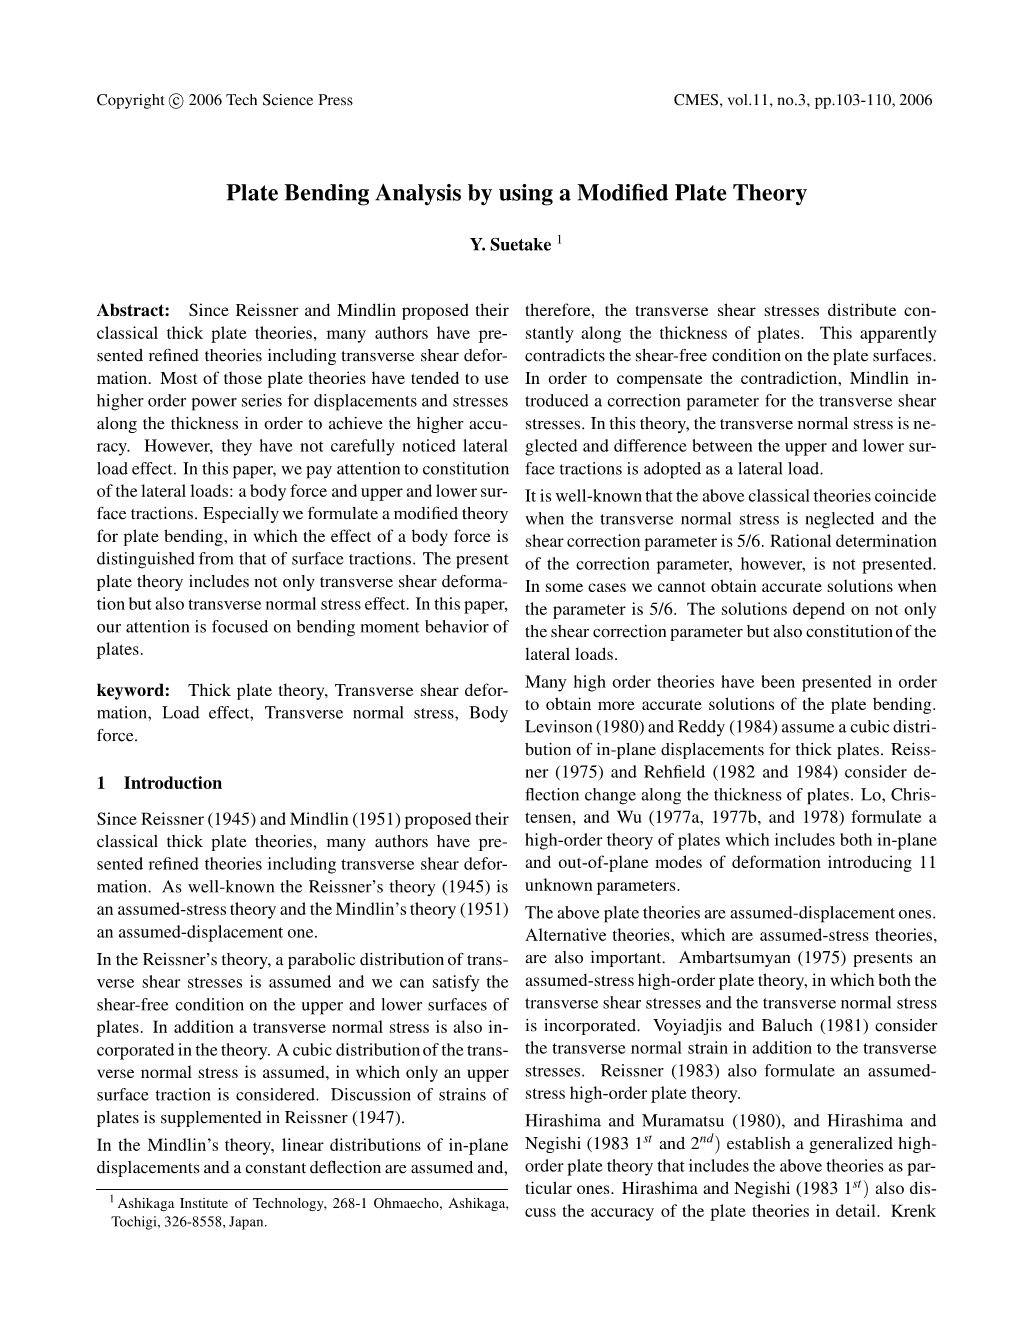 Plate Bending Analysis by Using a Modified Plate Theory